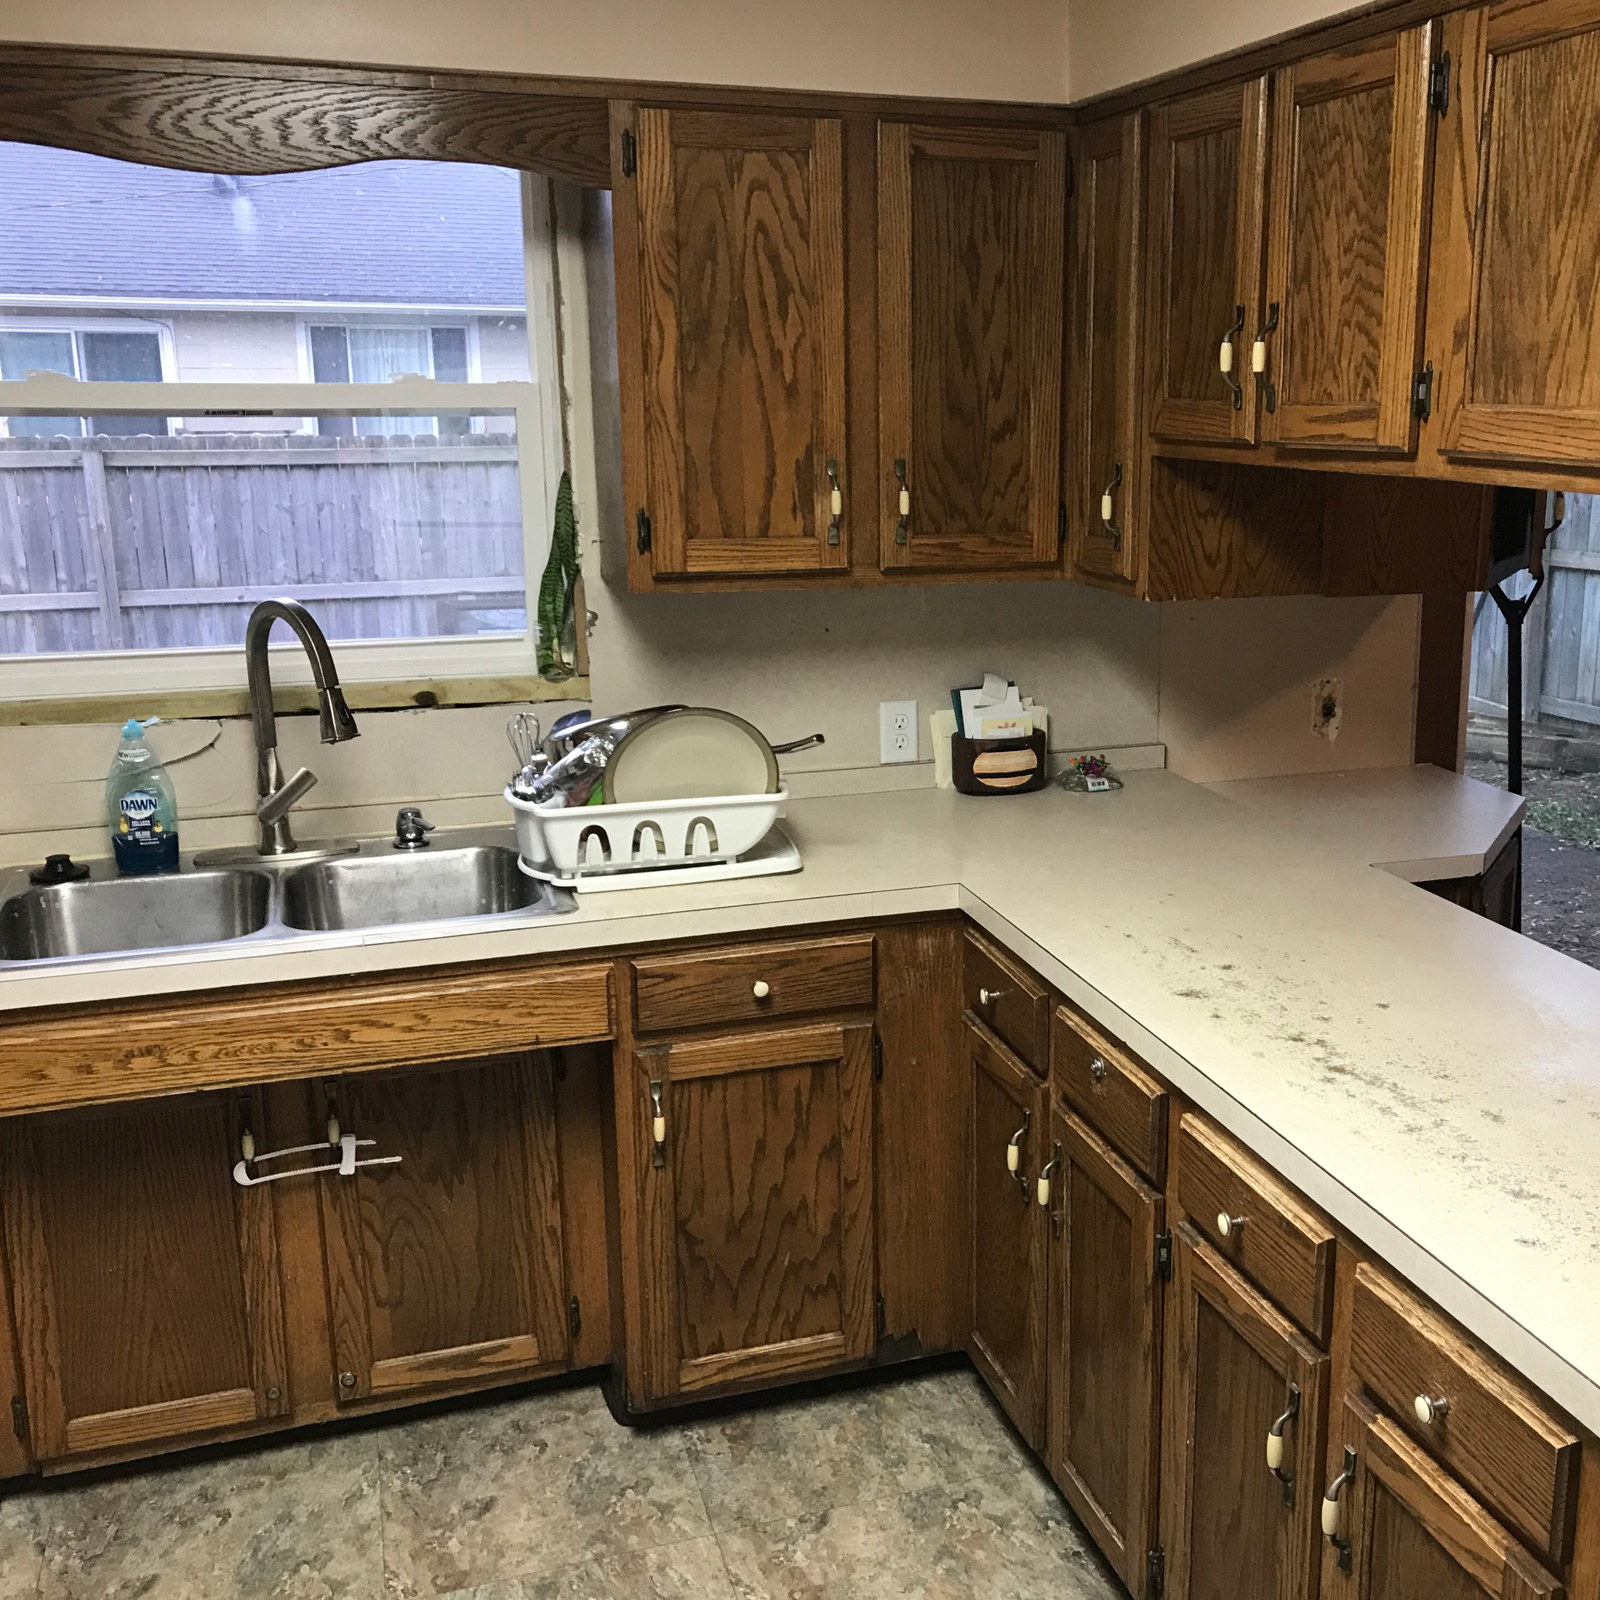 Entry 125 - This outdated kitchen is in need of a transformation